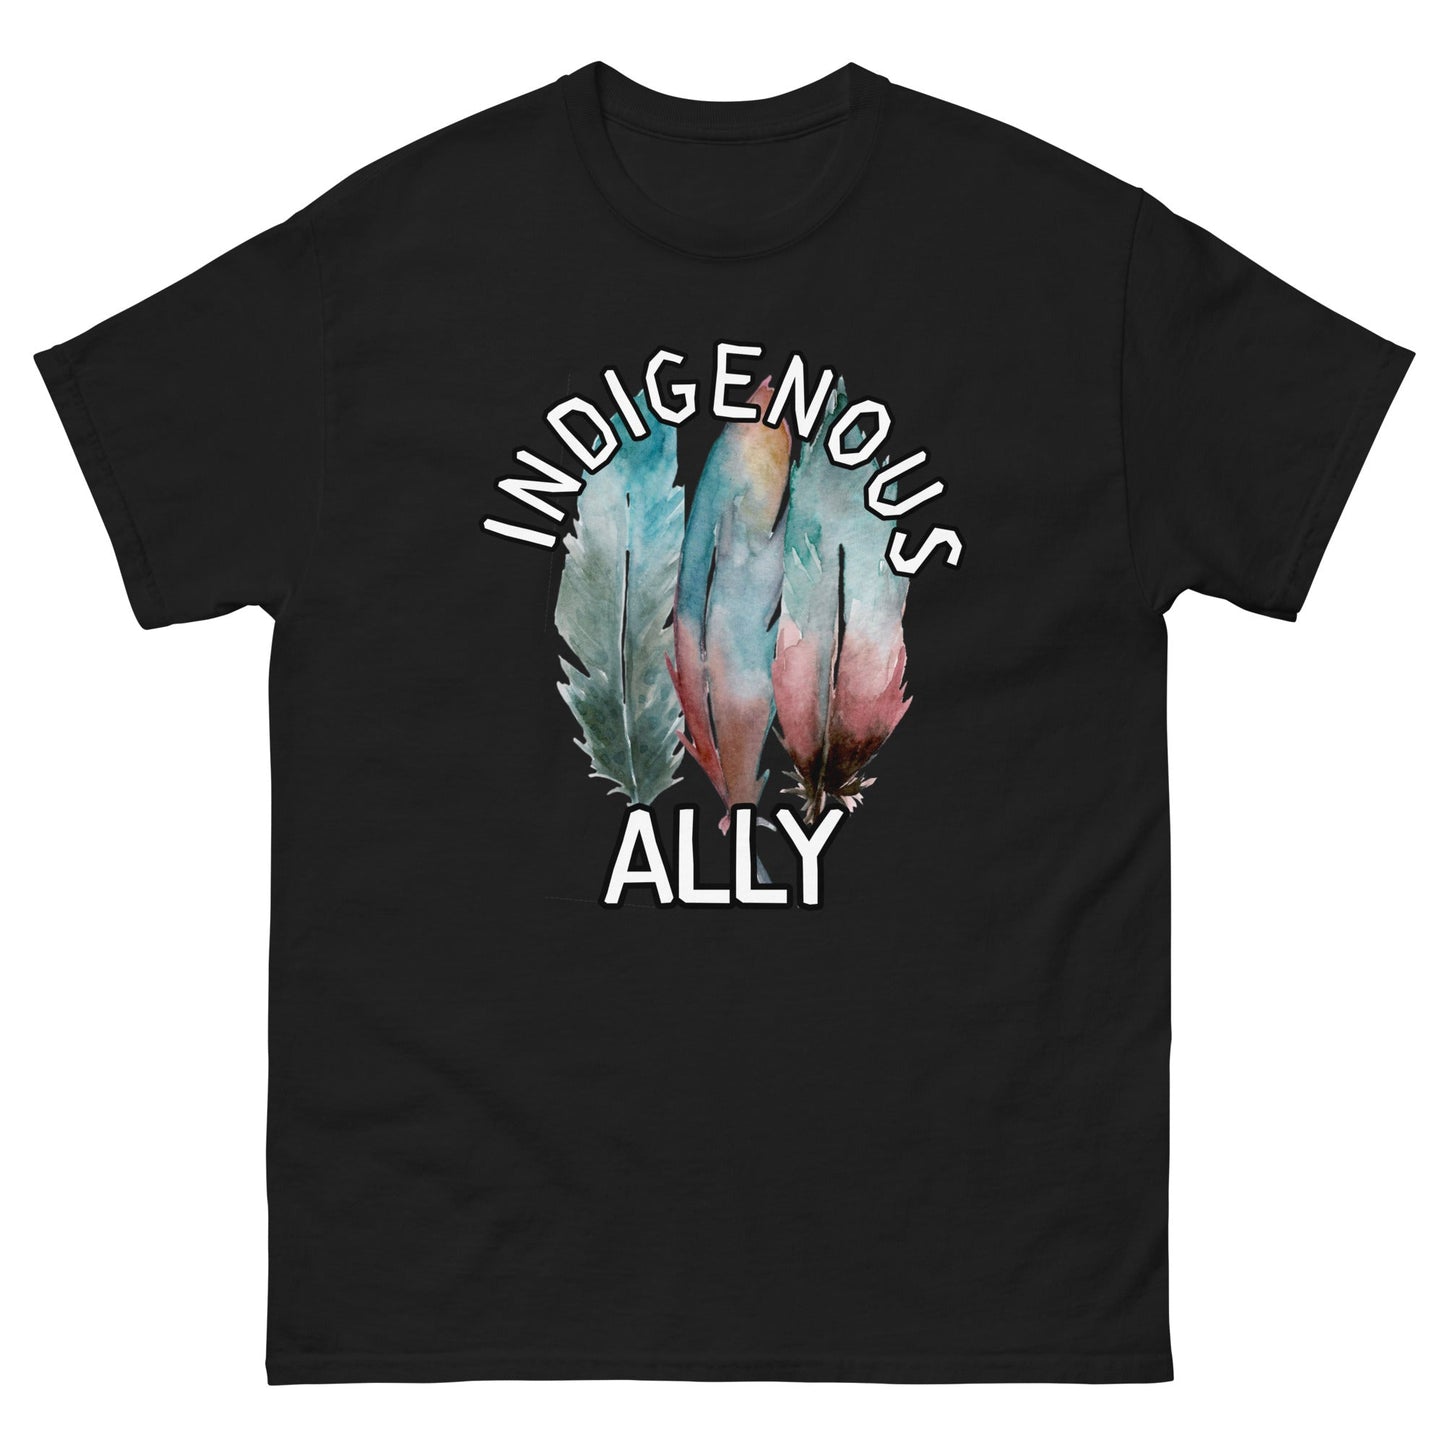 Indigenous Ally Tee